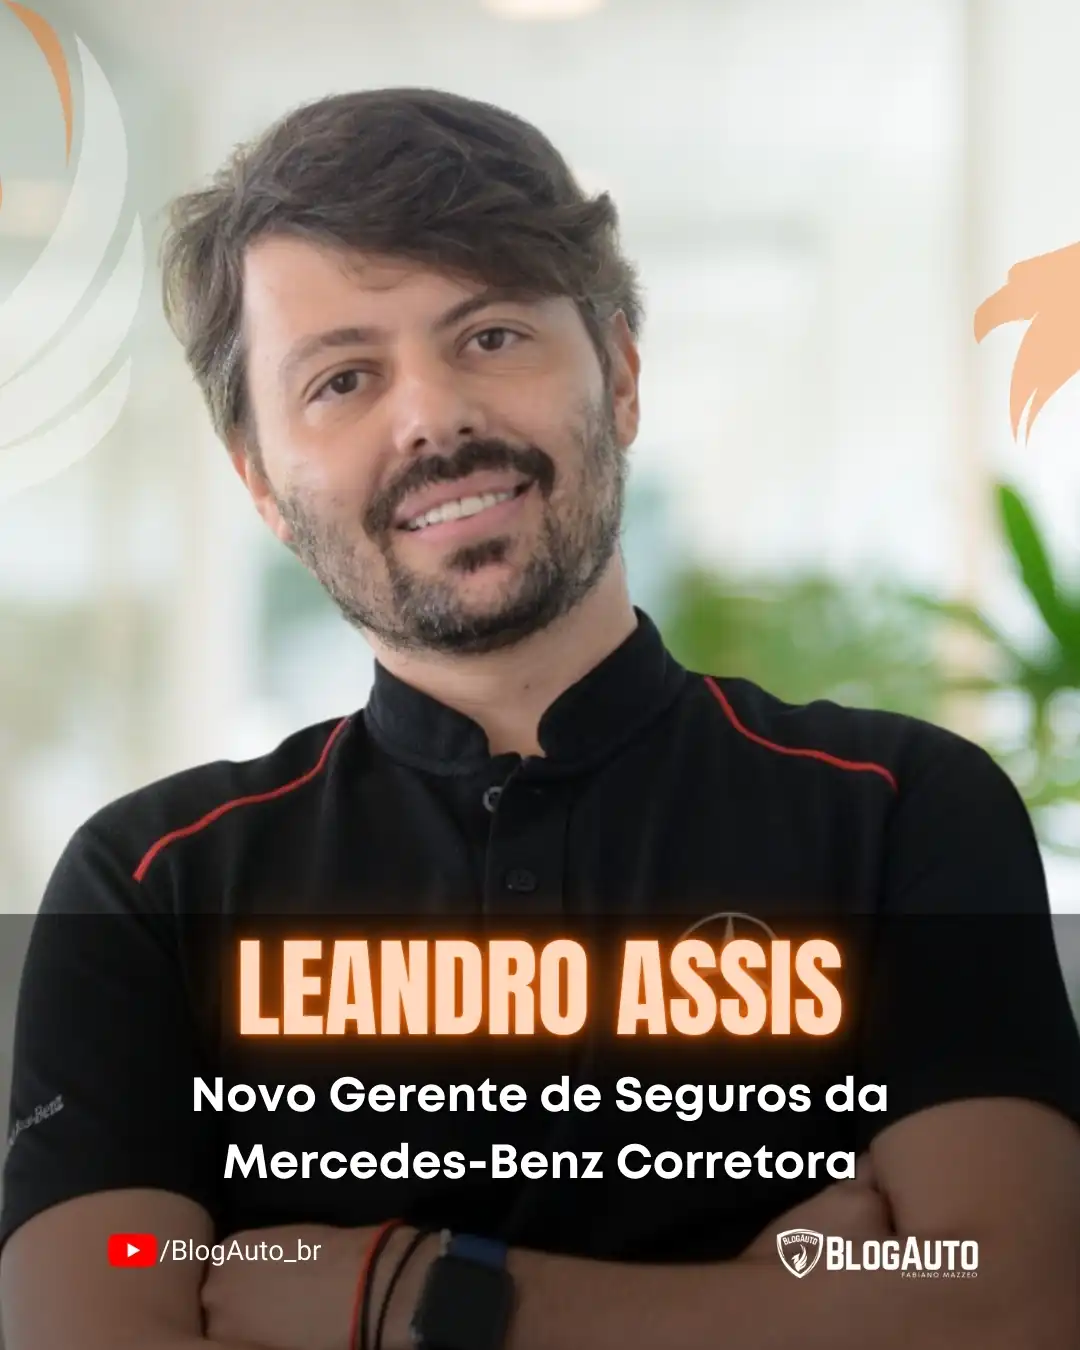 Leandro Assis